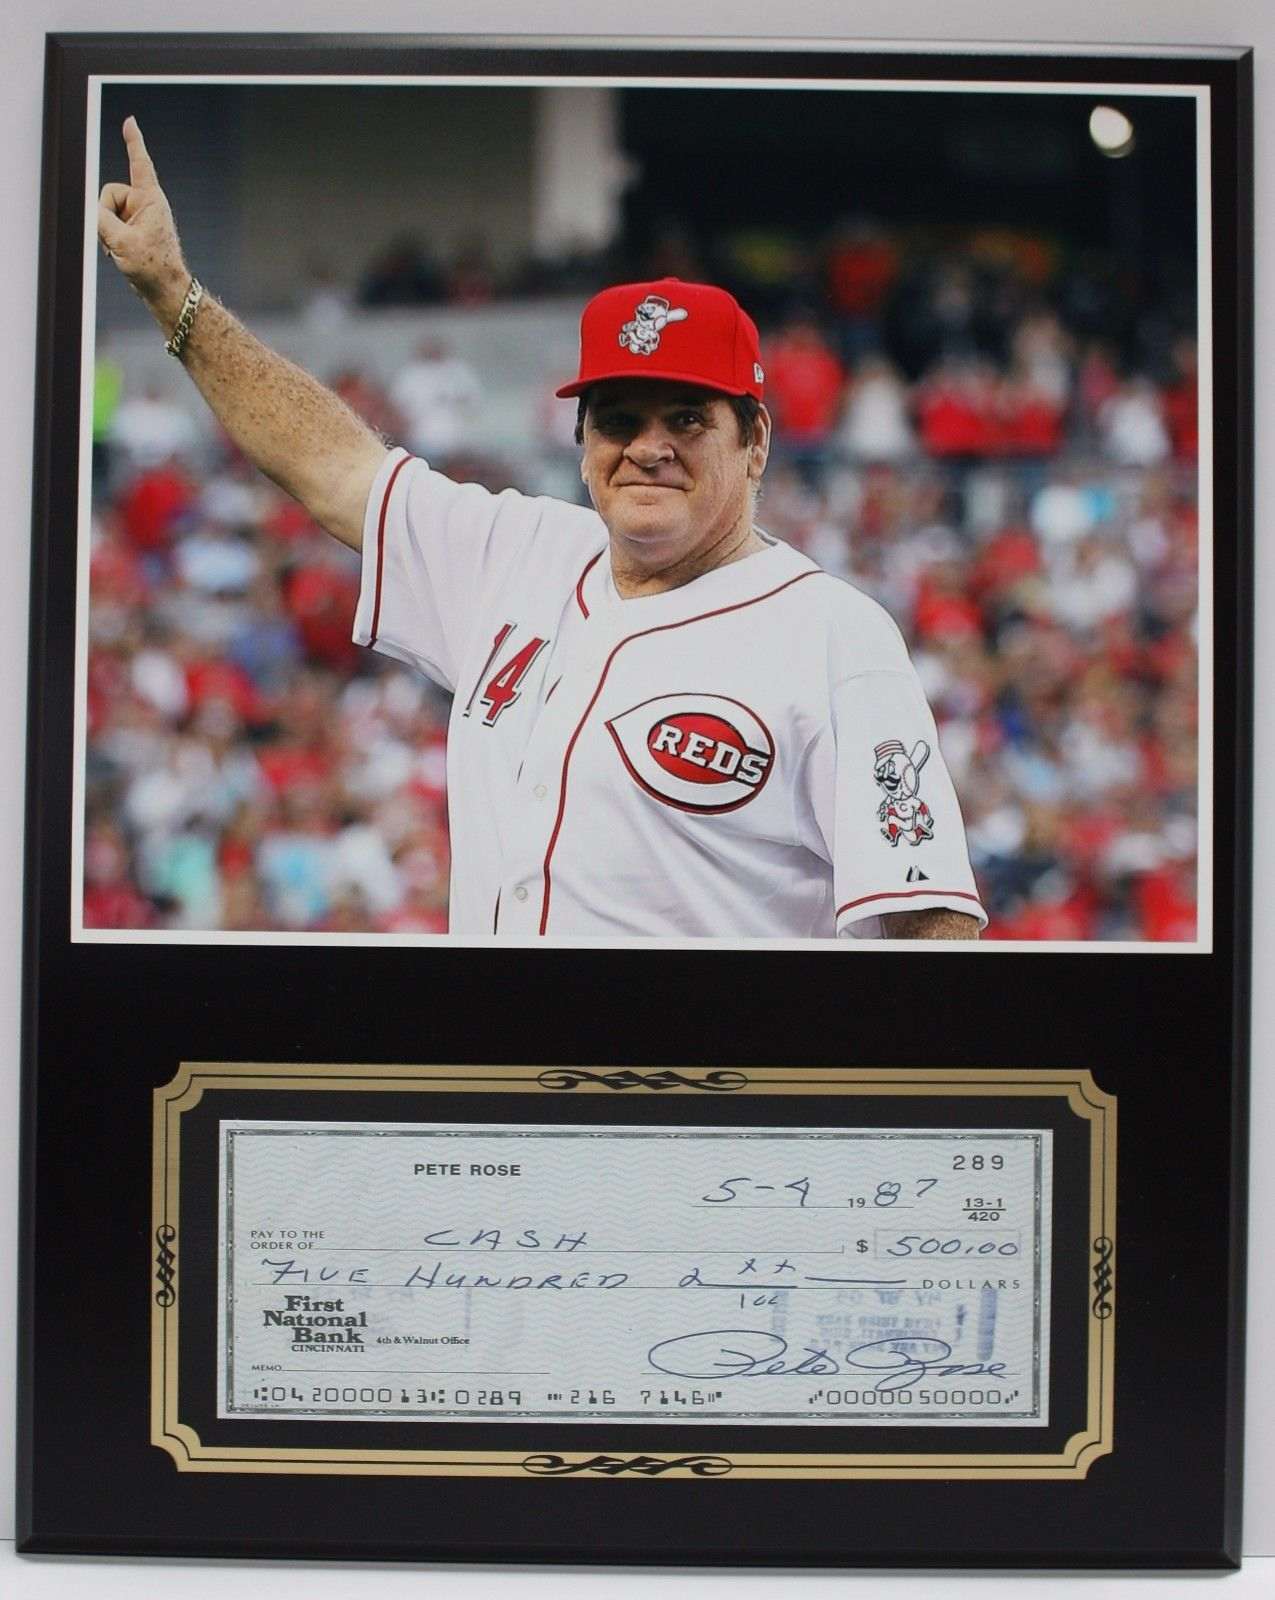 Pete Rose Baseball Reds Reproduction Signed Limited Edition Check Display -  Gold Record Outlet Album and Disc Collectible Memorabilia